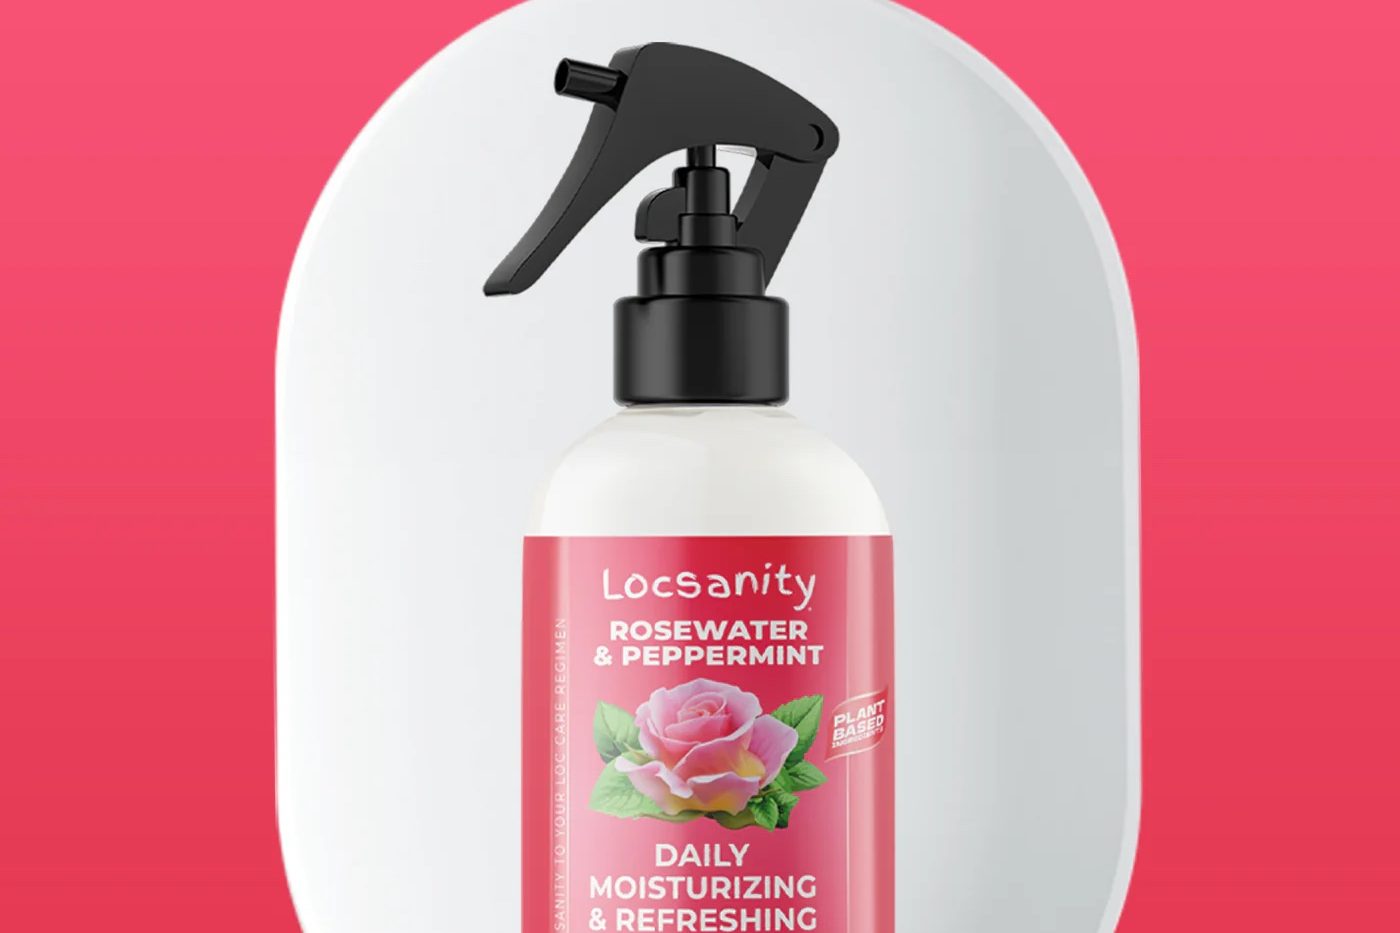 Locsanity Rosewater and Peppermint Daily Moisturizing/Refreshing Spray